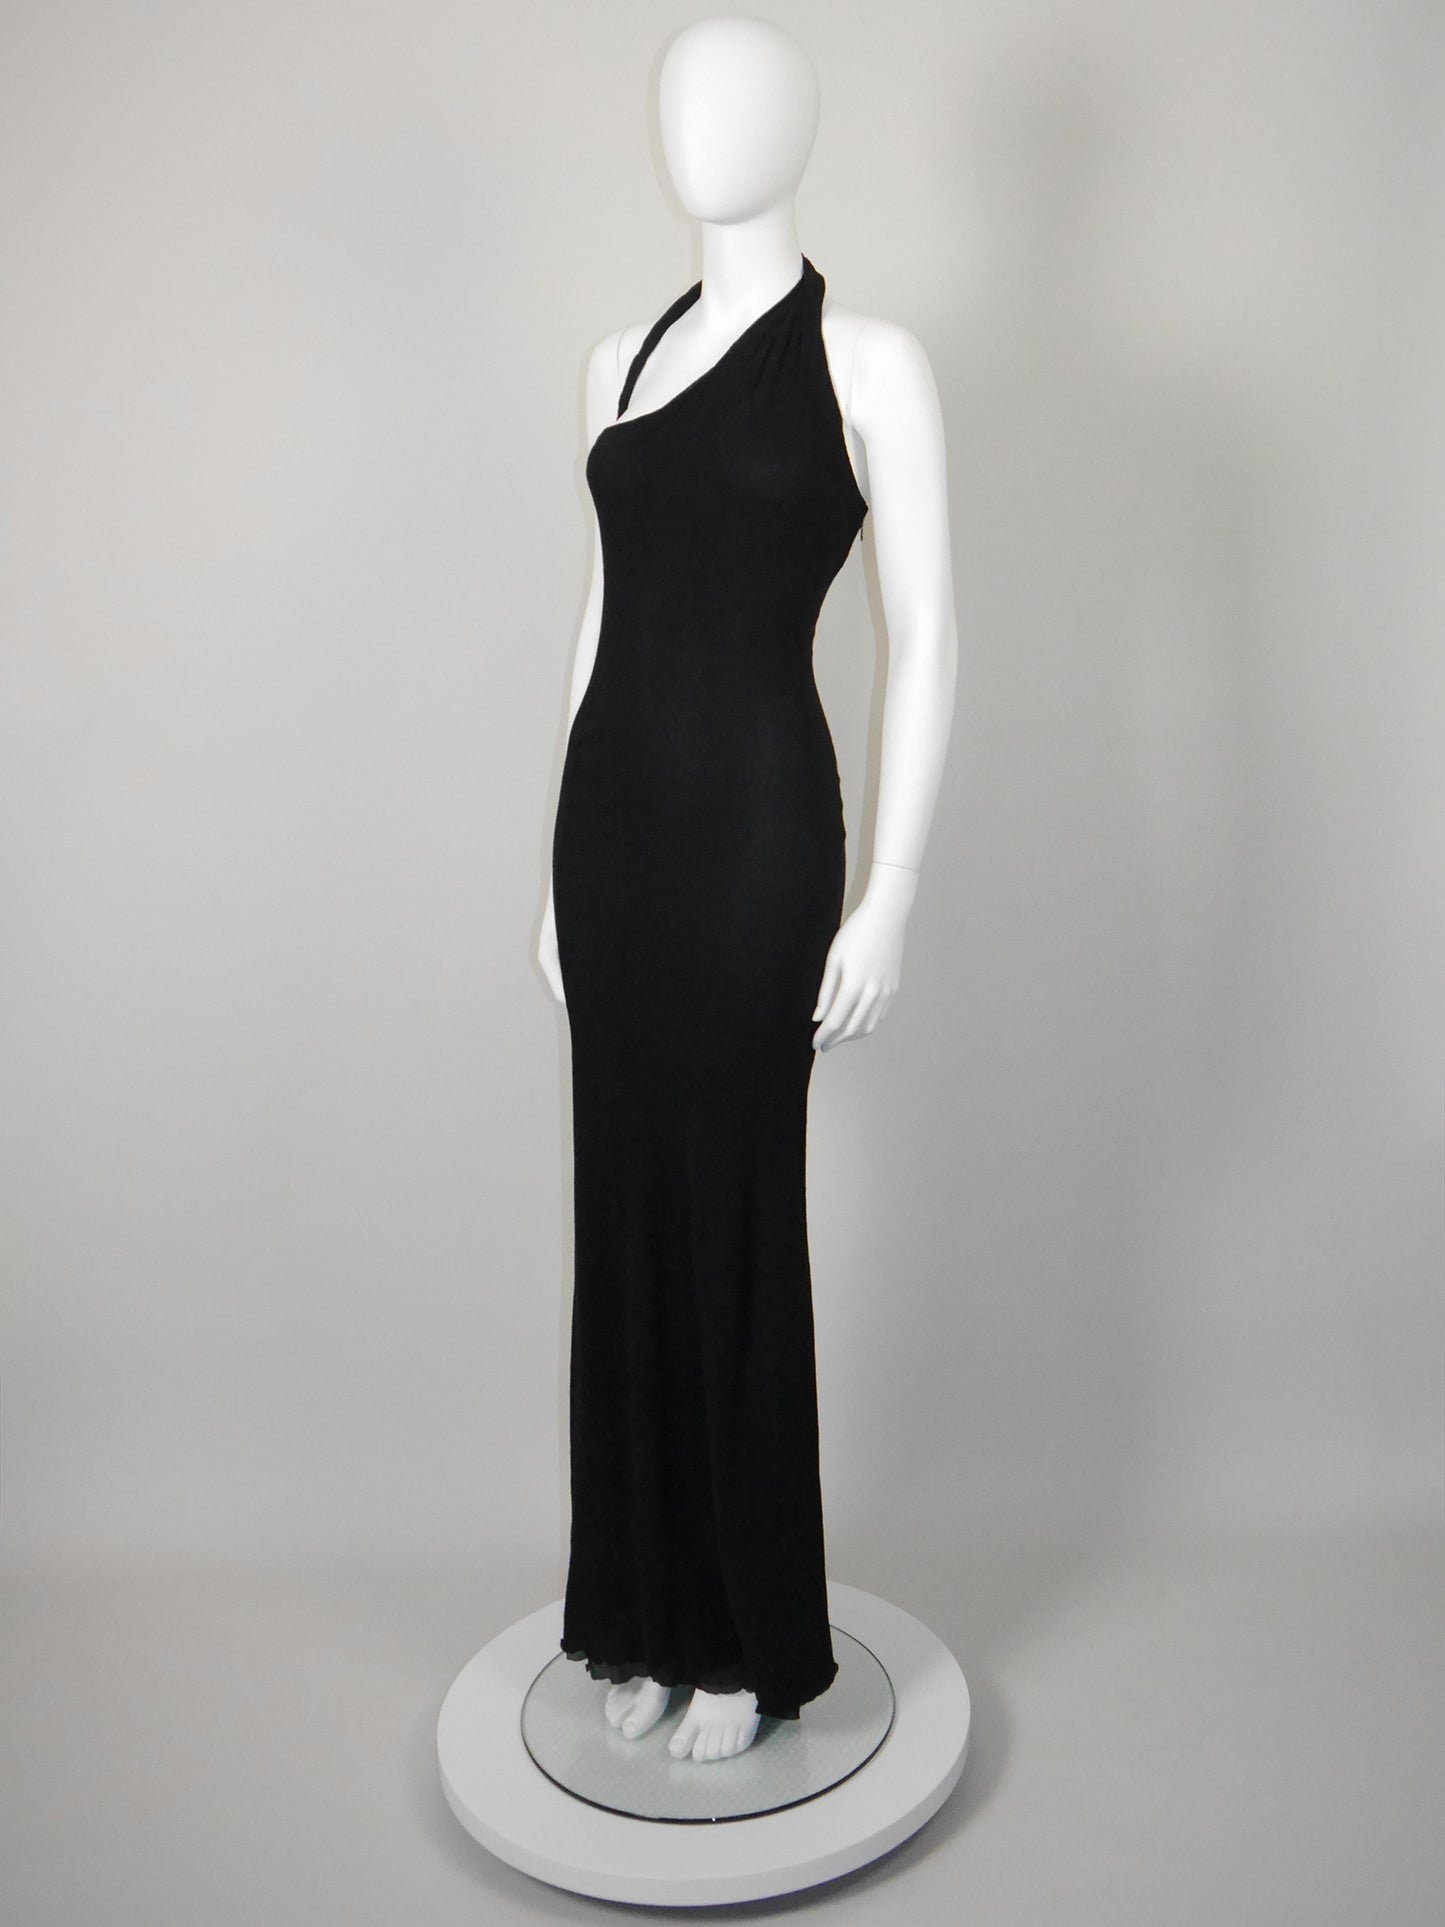 GIANNI VERSACE Couture 1990s 2000s Vintage Silk Maxi Evening Gown w/ High Back Slit Size S